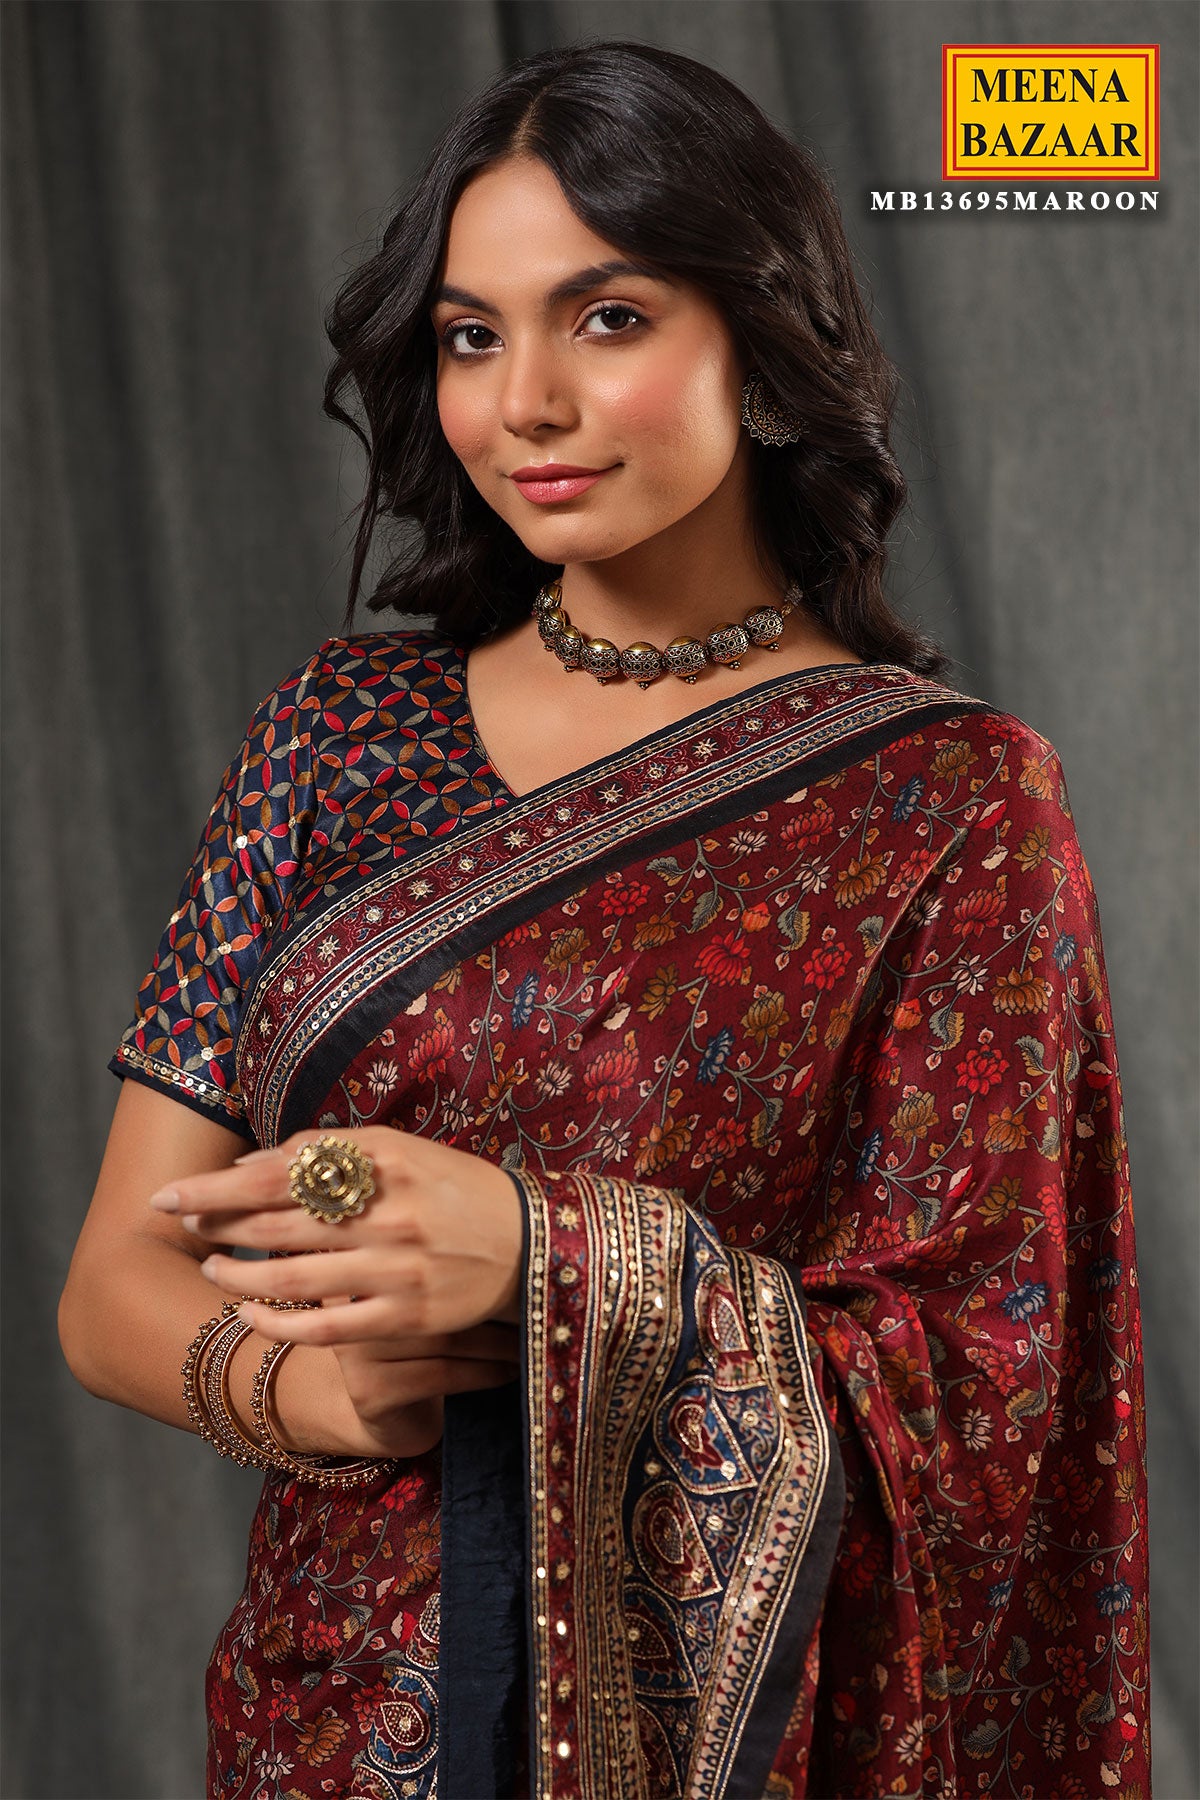 Maroon Satin Printed Saree with Embroidery